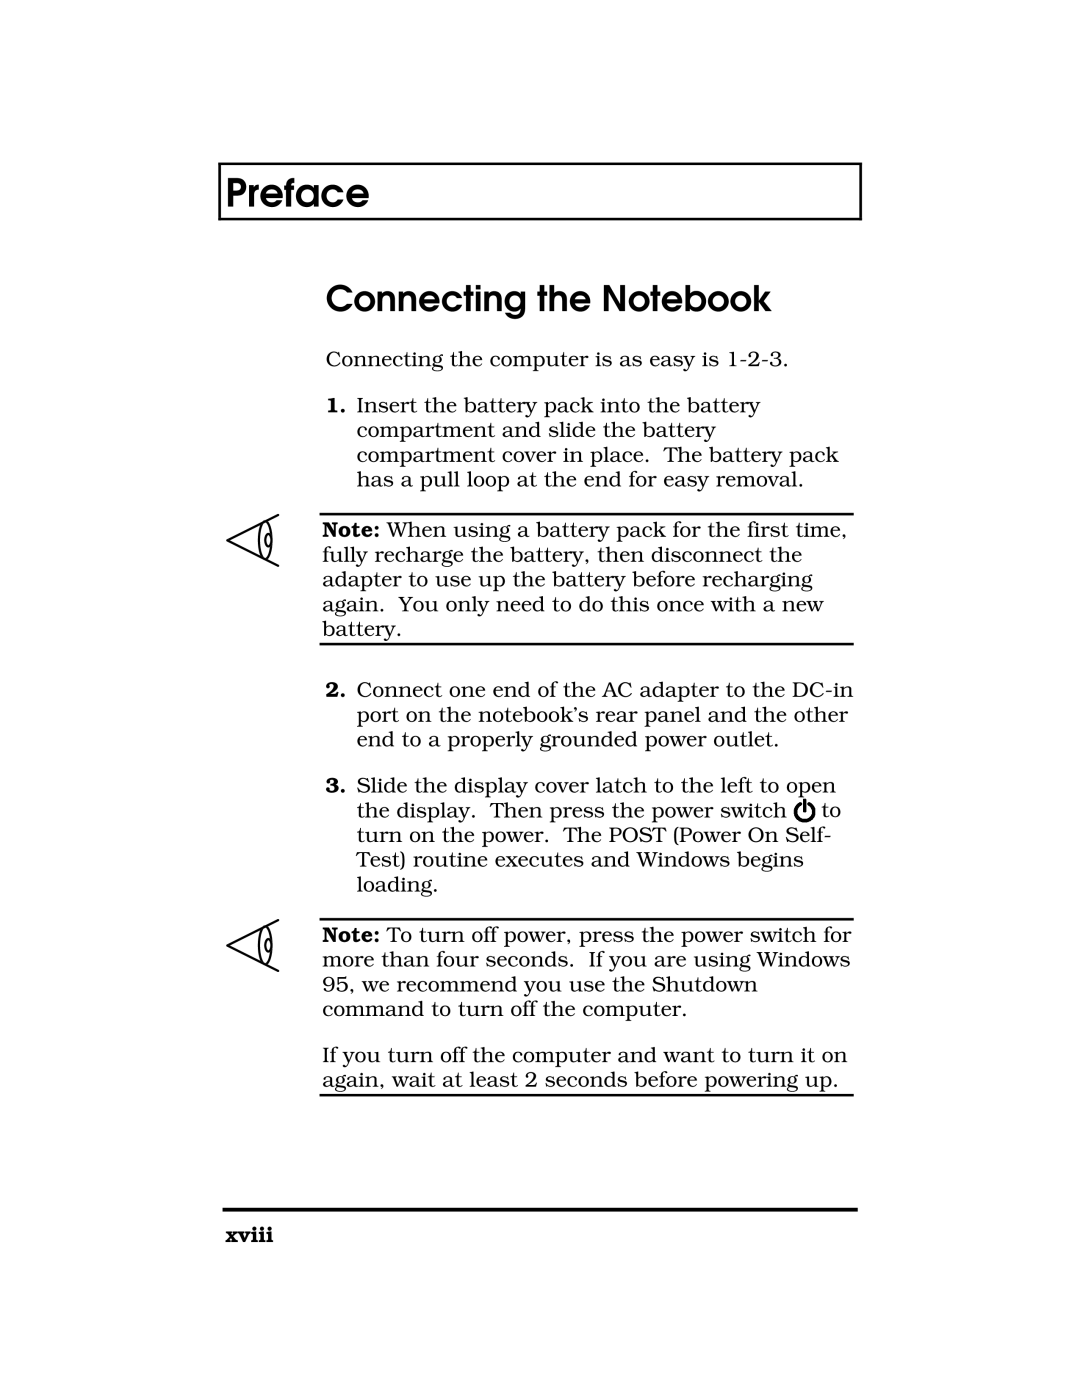 Acer 390 Series manual Connecting the Notebook, xviii, Preface 